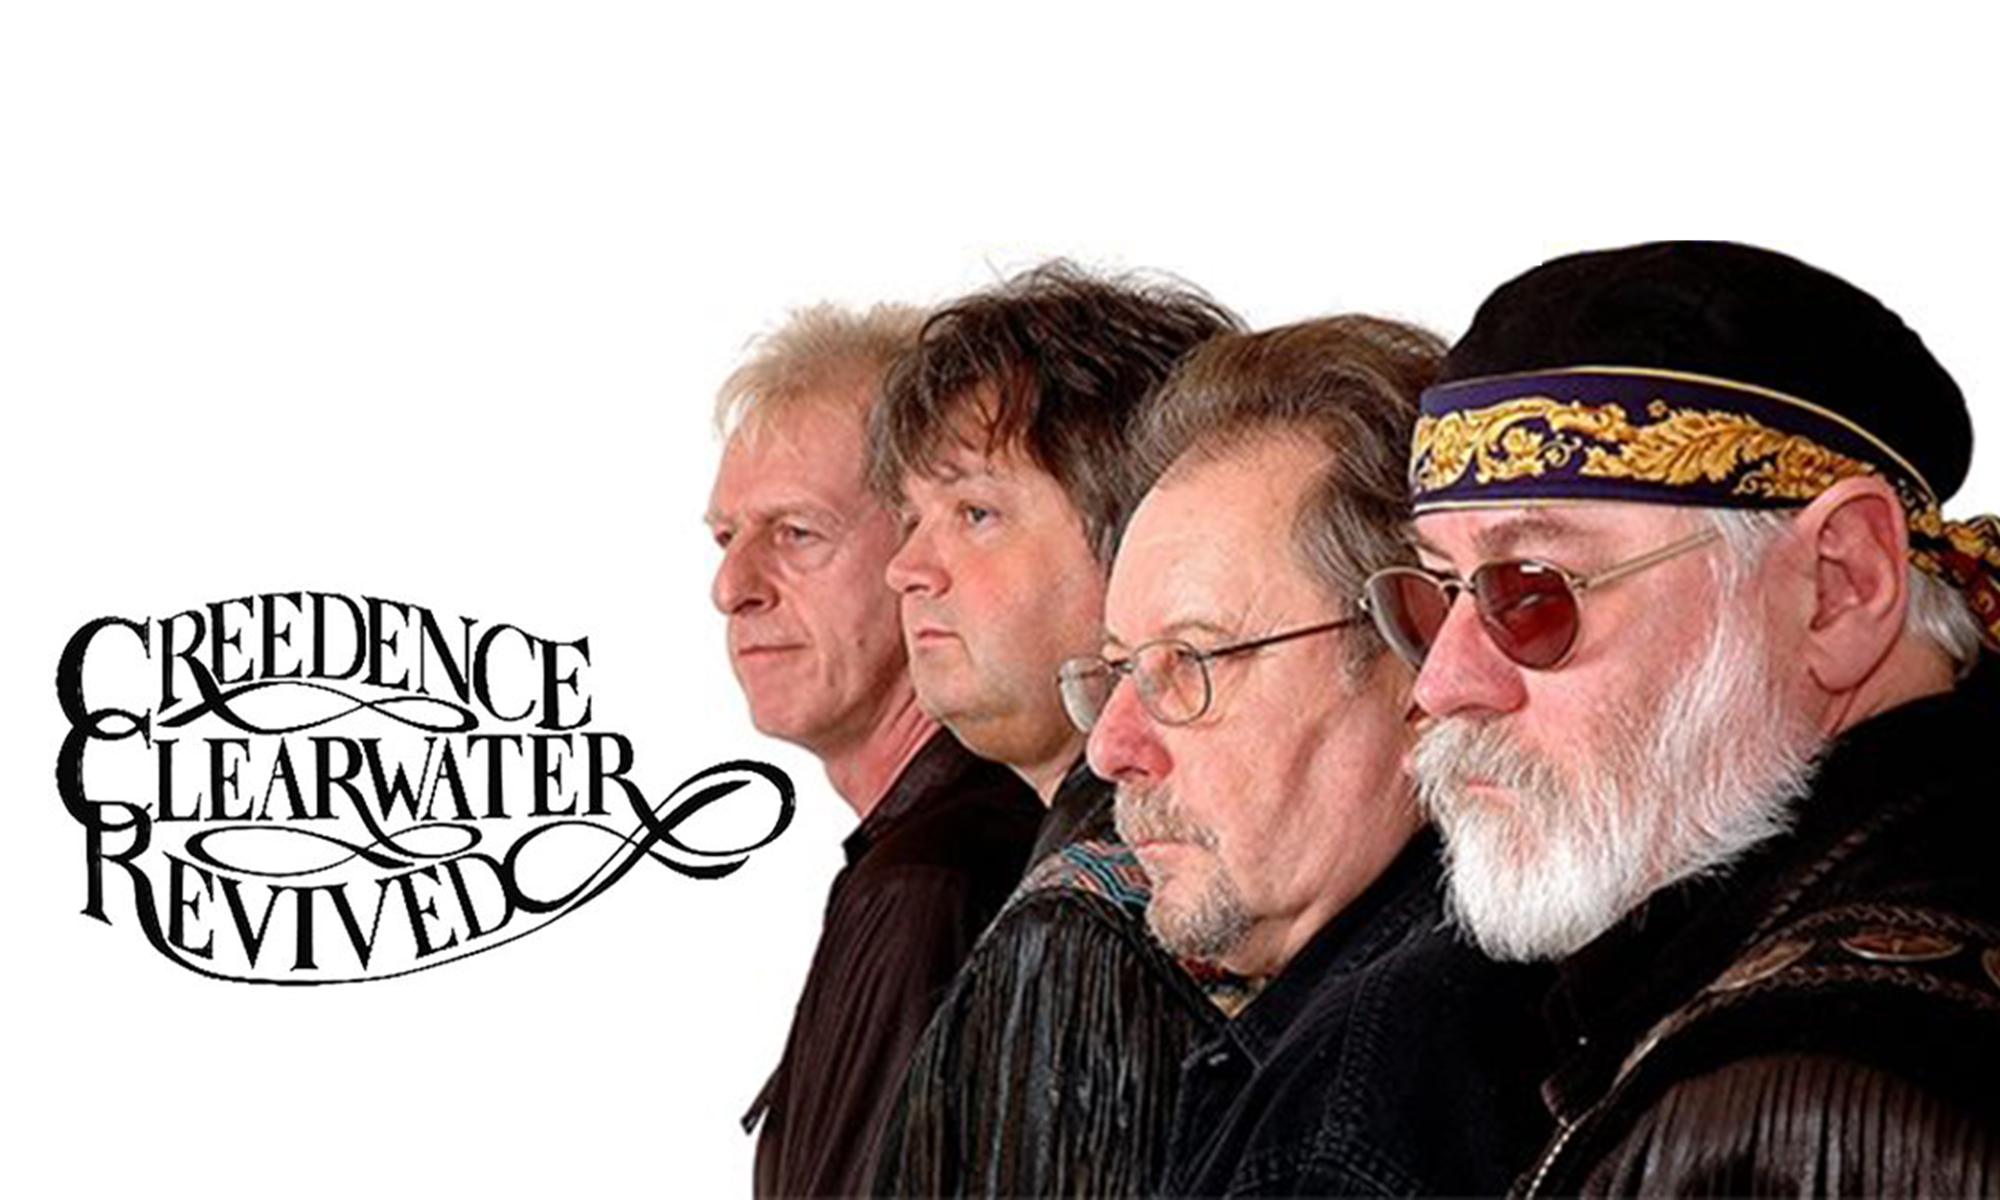 Konzert – CCR Creedence Clearwater Revived